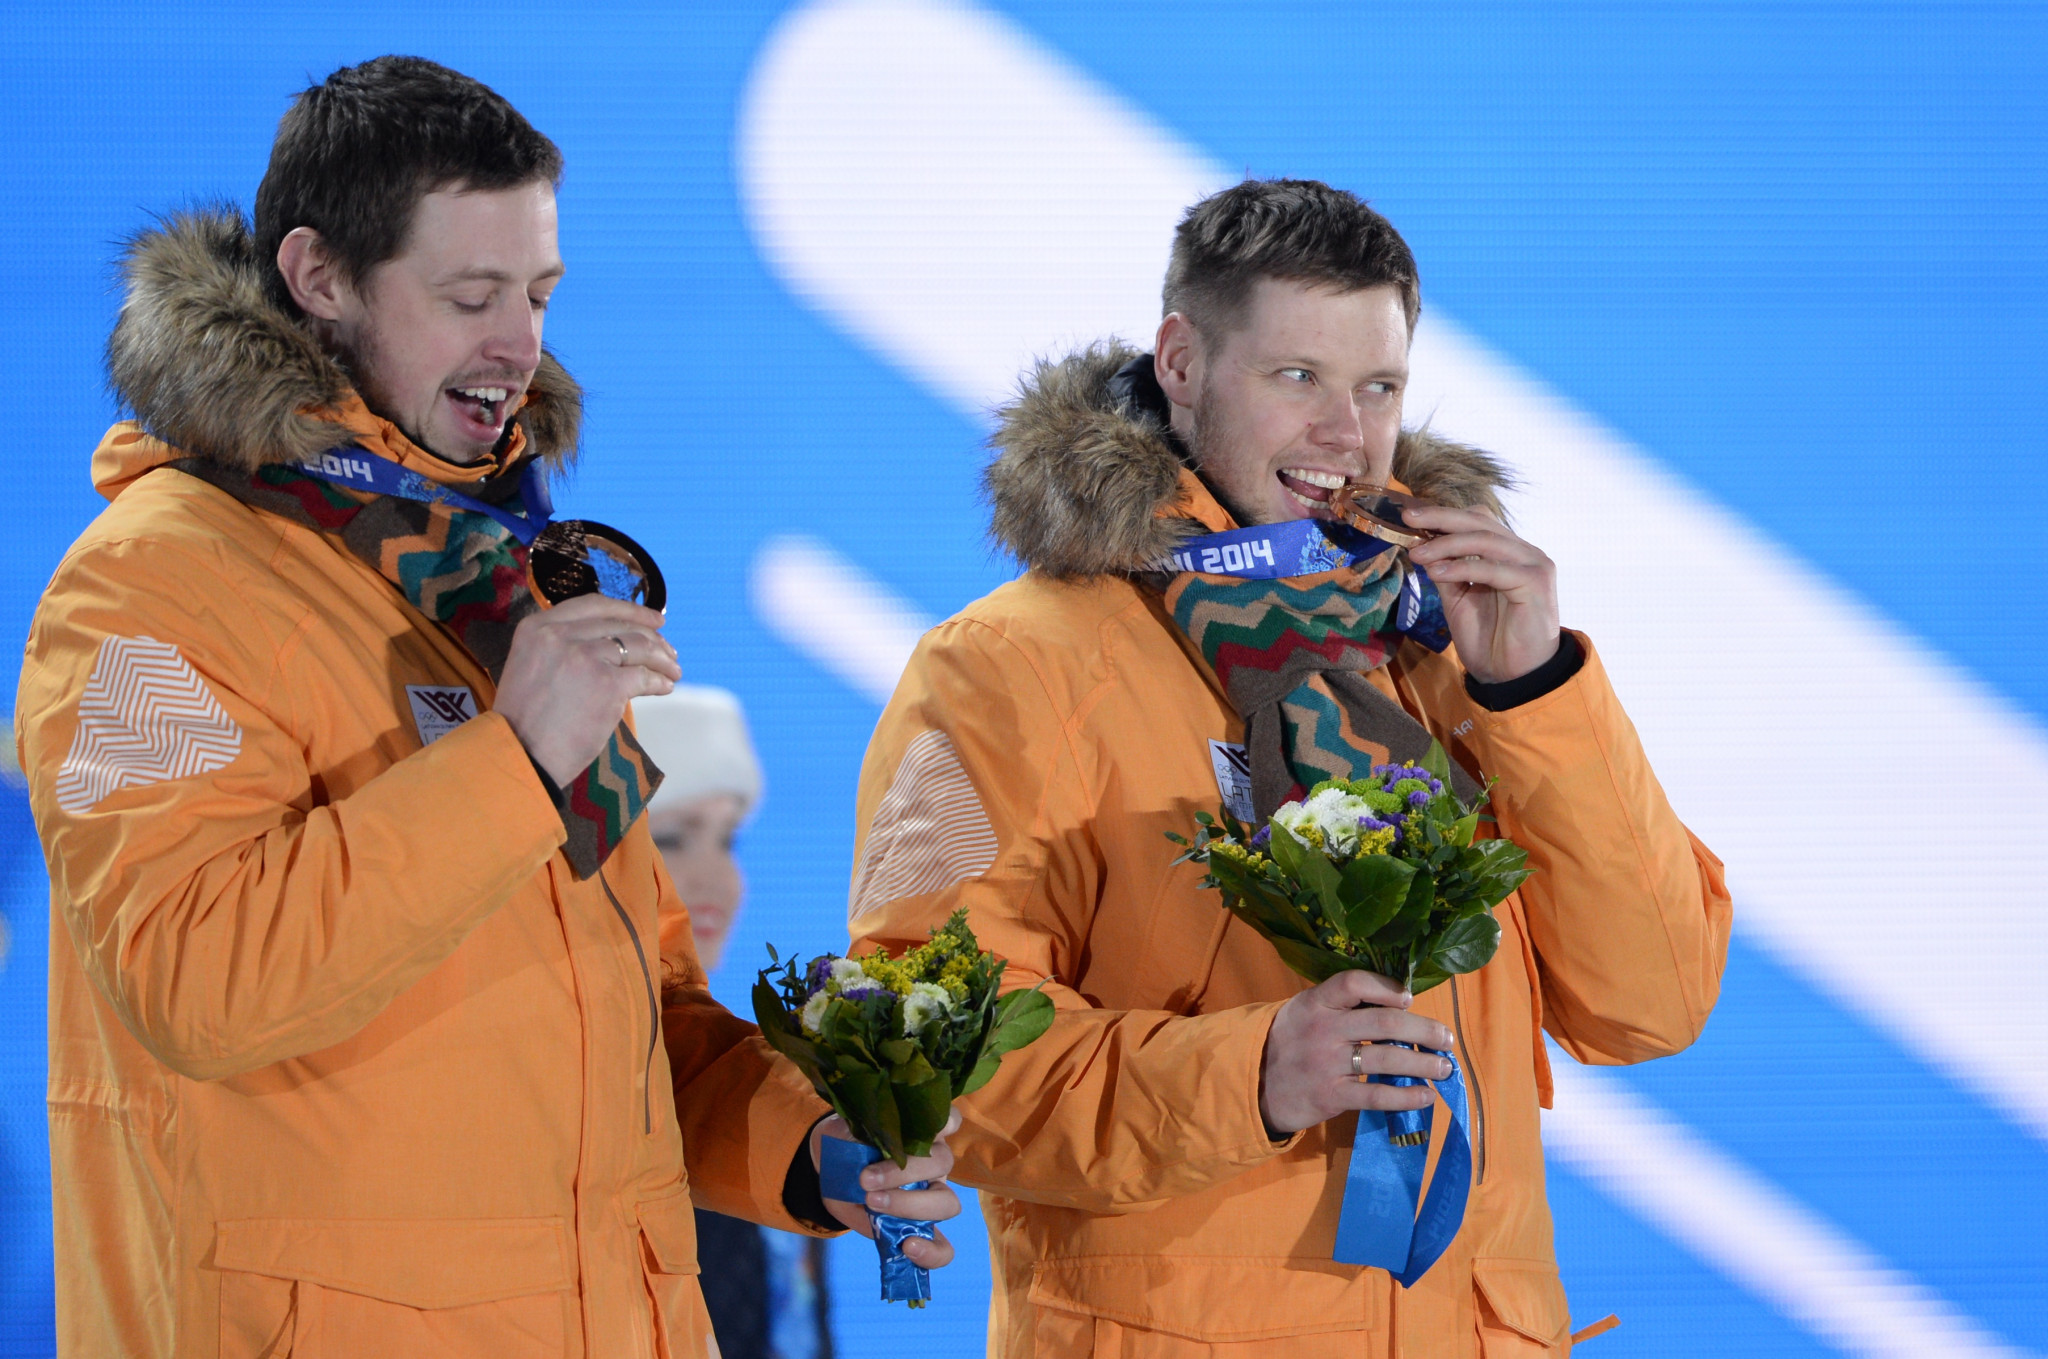 Latvian brothers Andris Šics, left, and Juris Šics have both won three luge medals at the Winter Olympics ©Getty Images